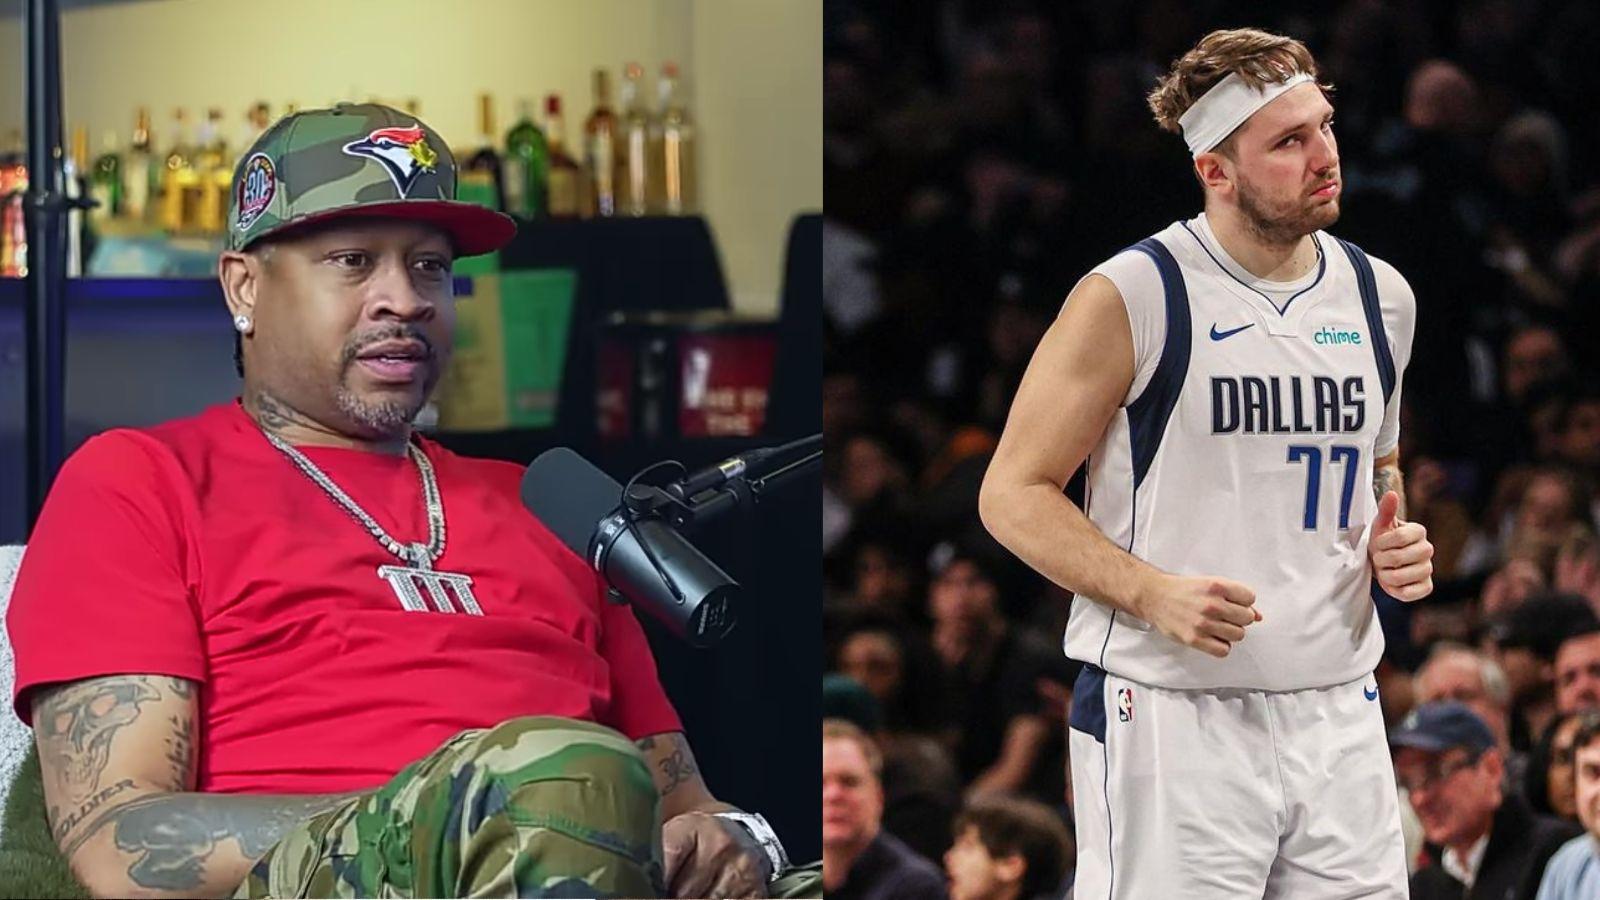 Allen Iverson (left) on the set of "The Big Podcast with Shaq," and Luka Doncic (right) on the court for the Dallas Mavericks.